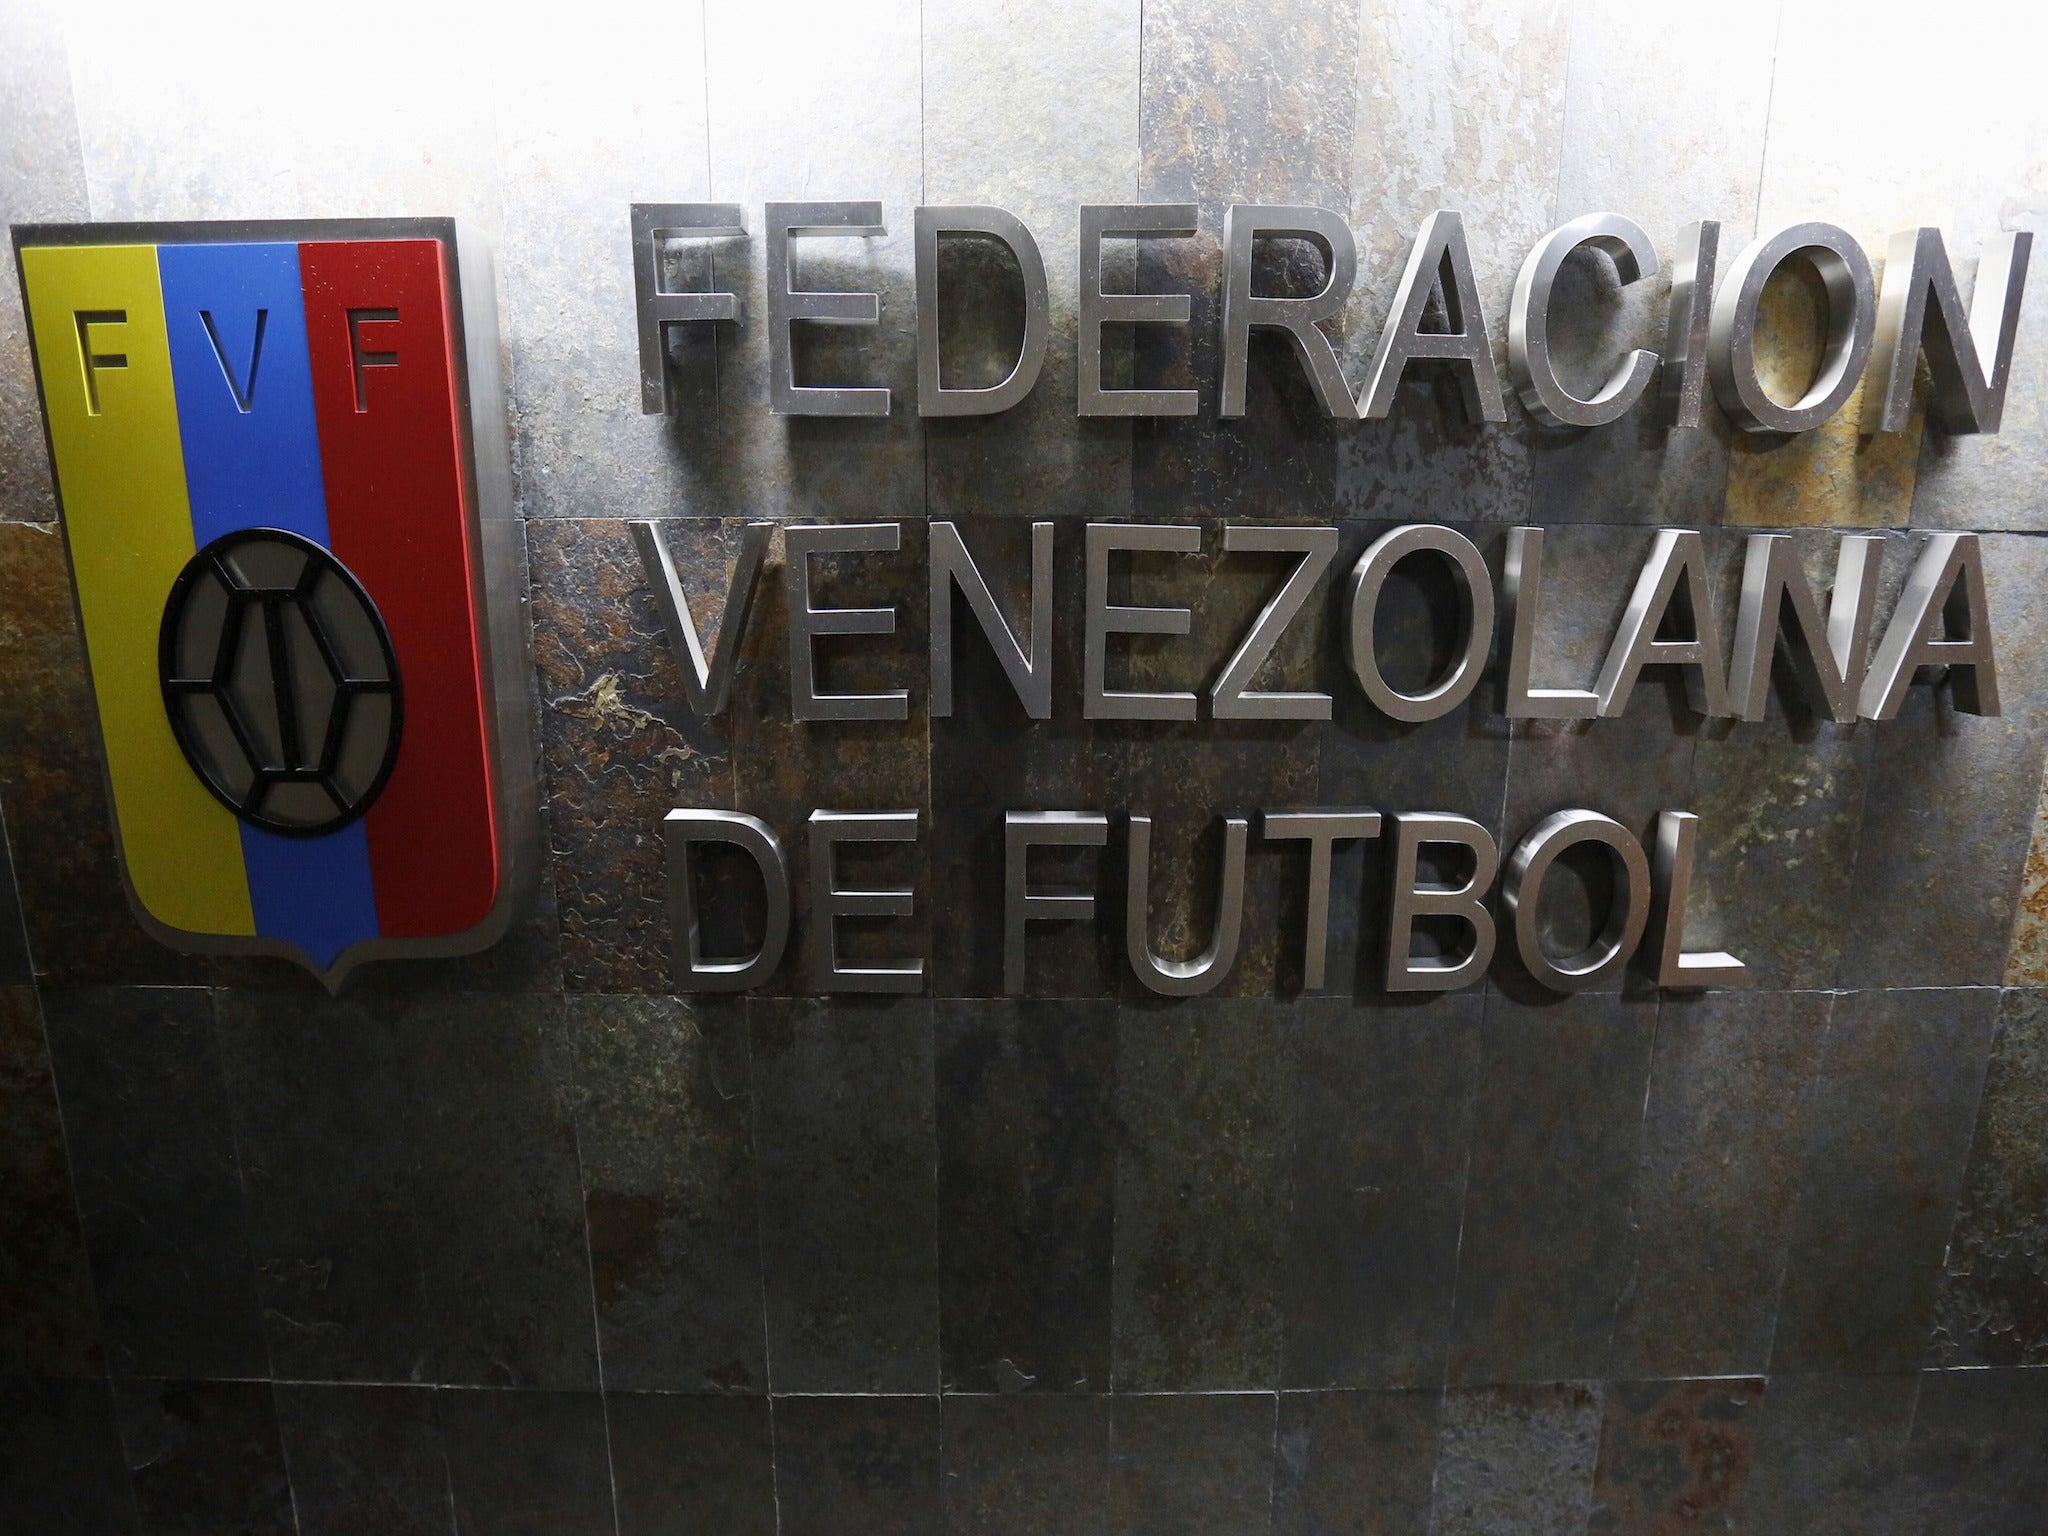 The offices of the Venezuealan Football Federation were raided on Wednesday